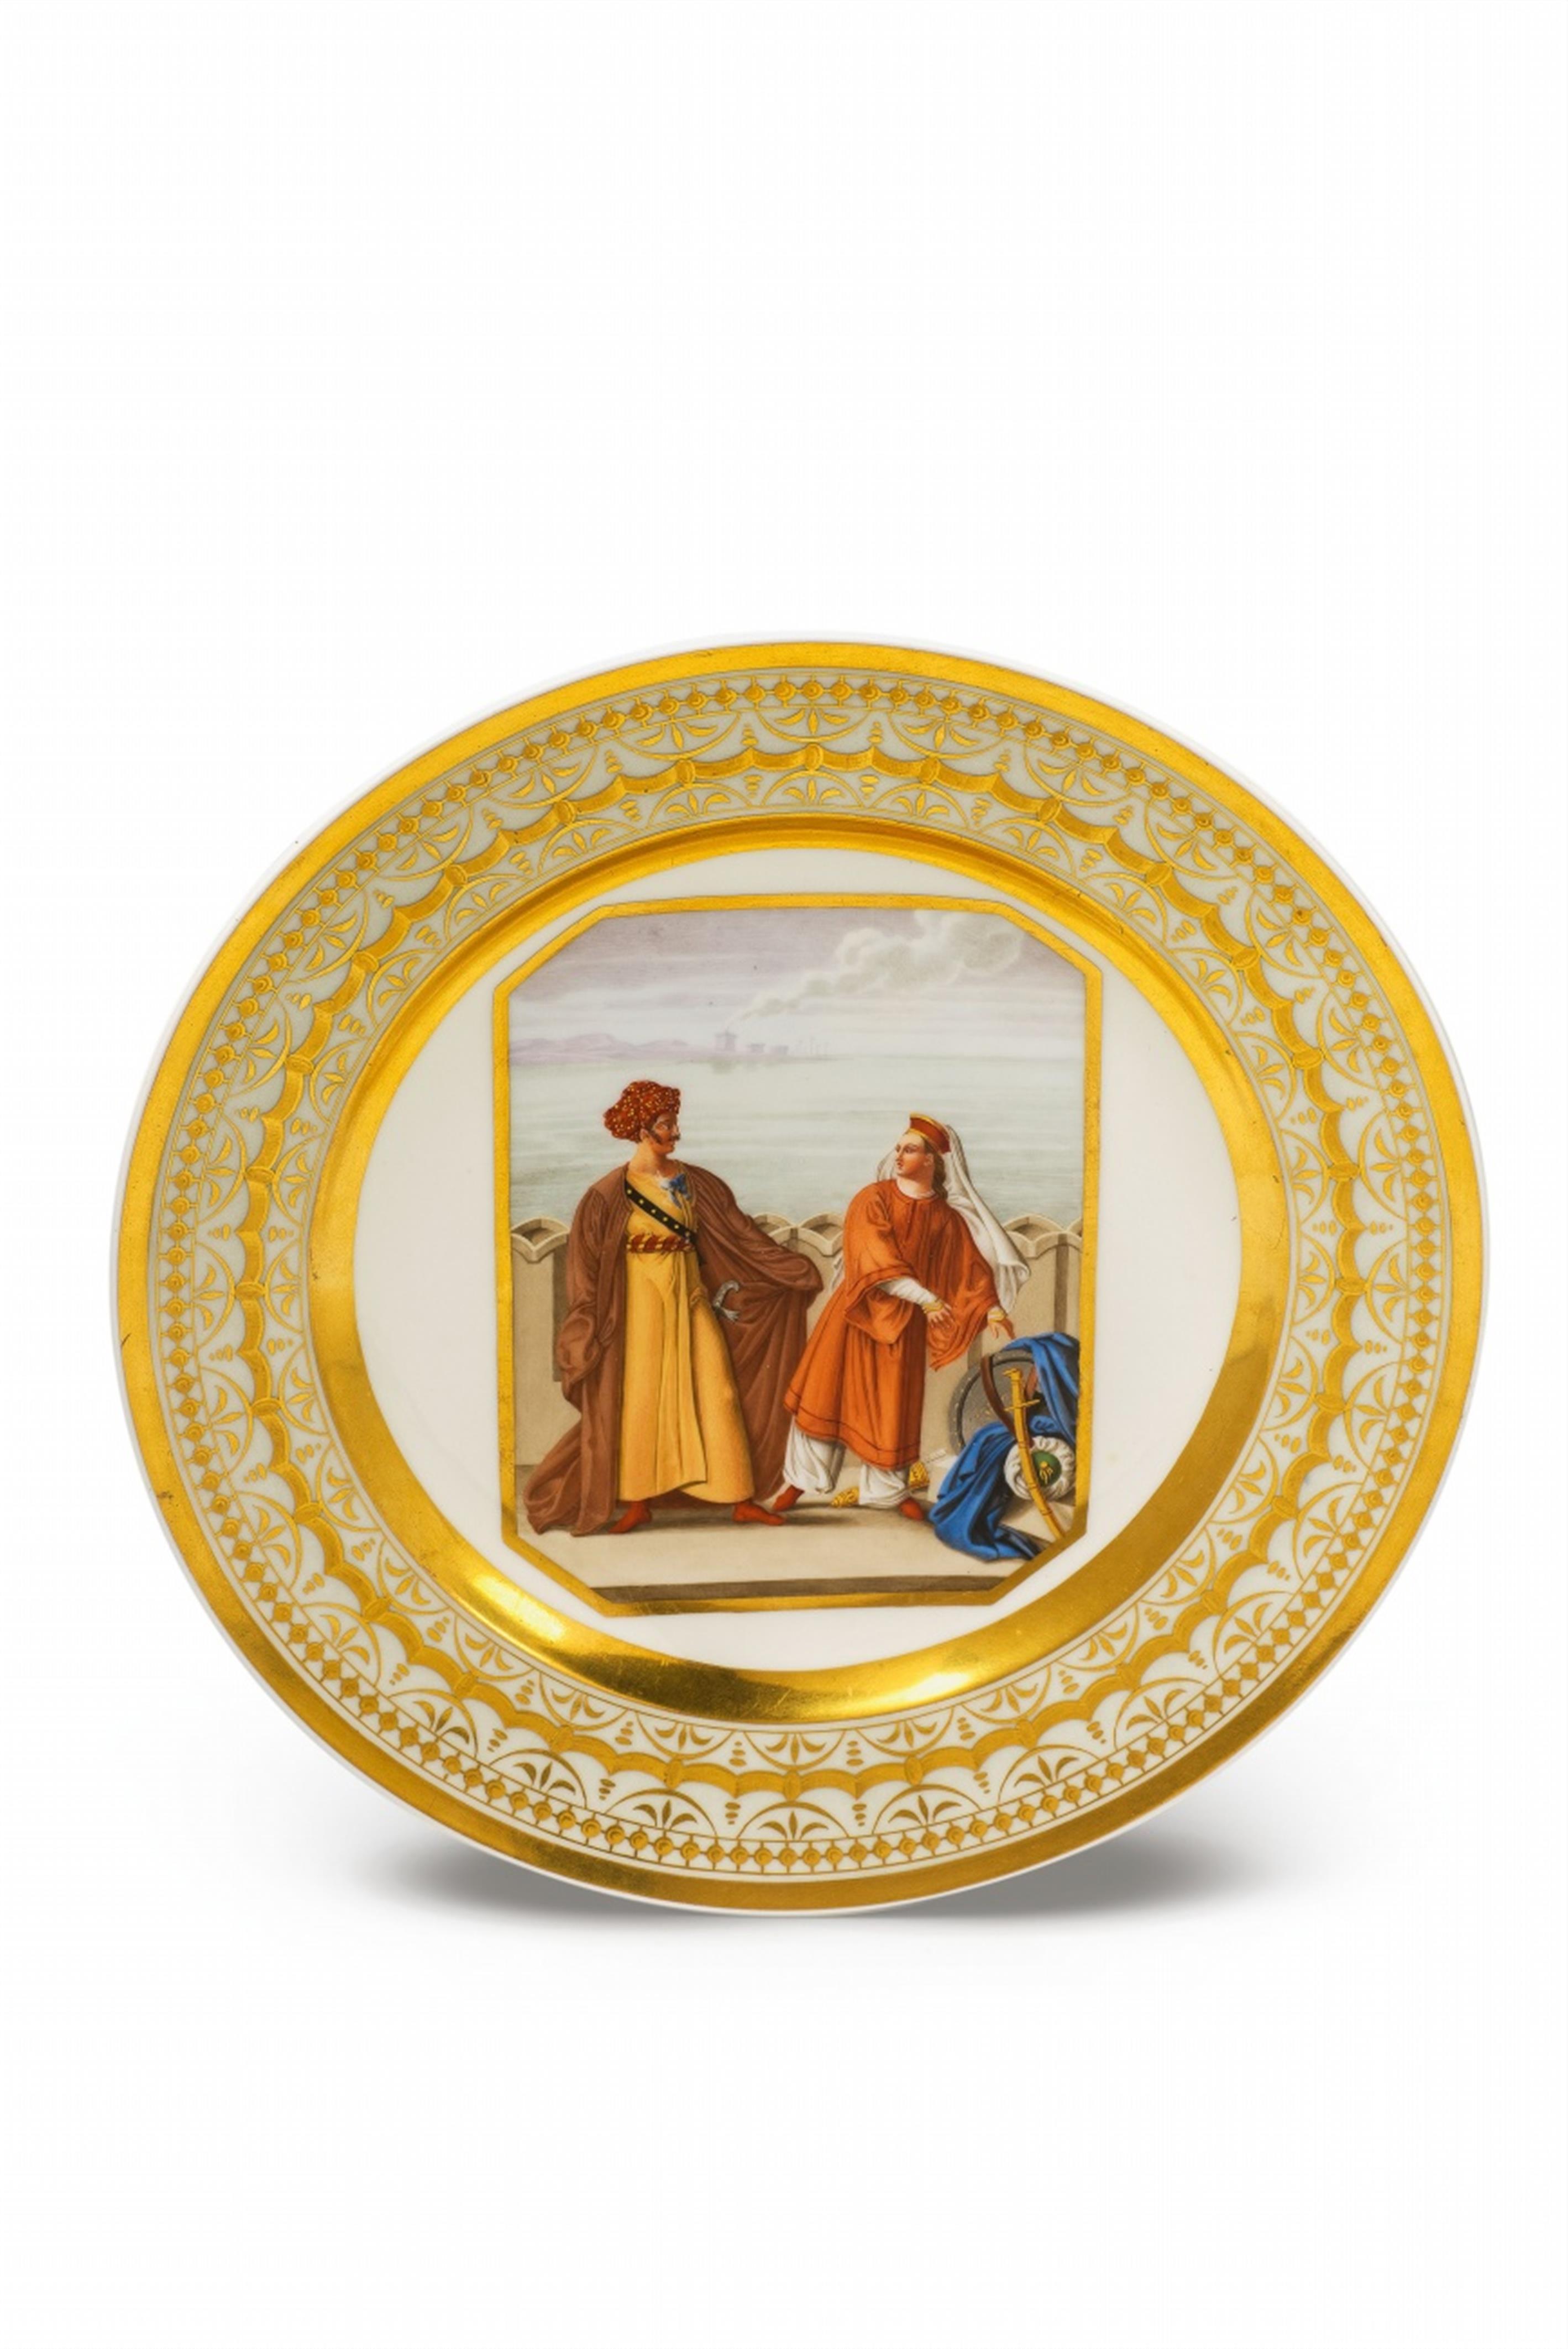 A Berlin KPM porcelain plate with a motif from Lalla Rûkh - image-1